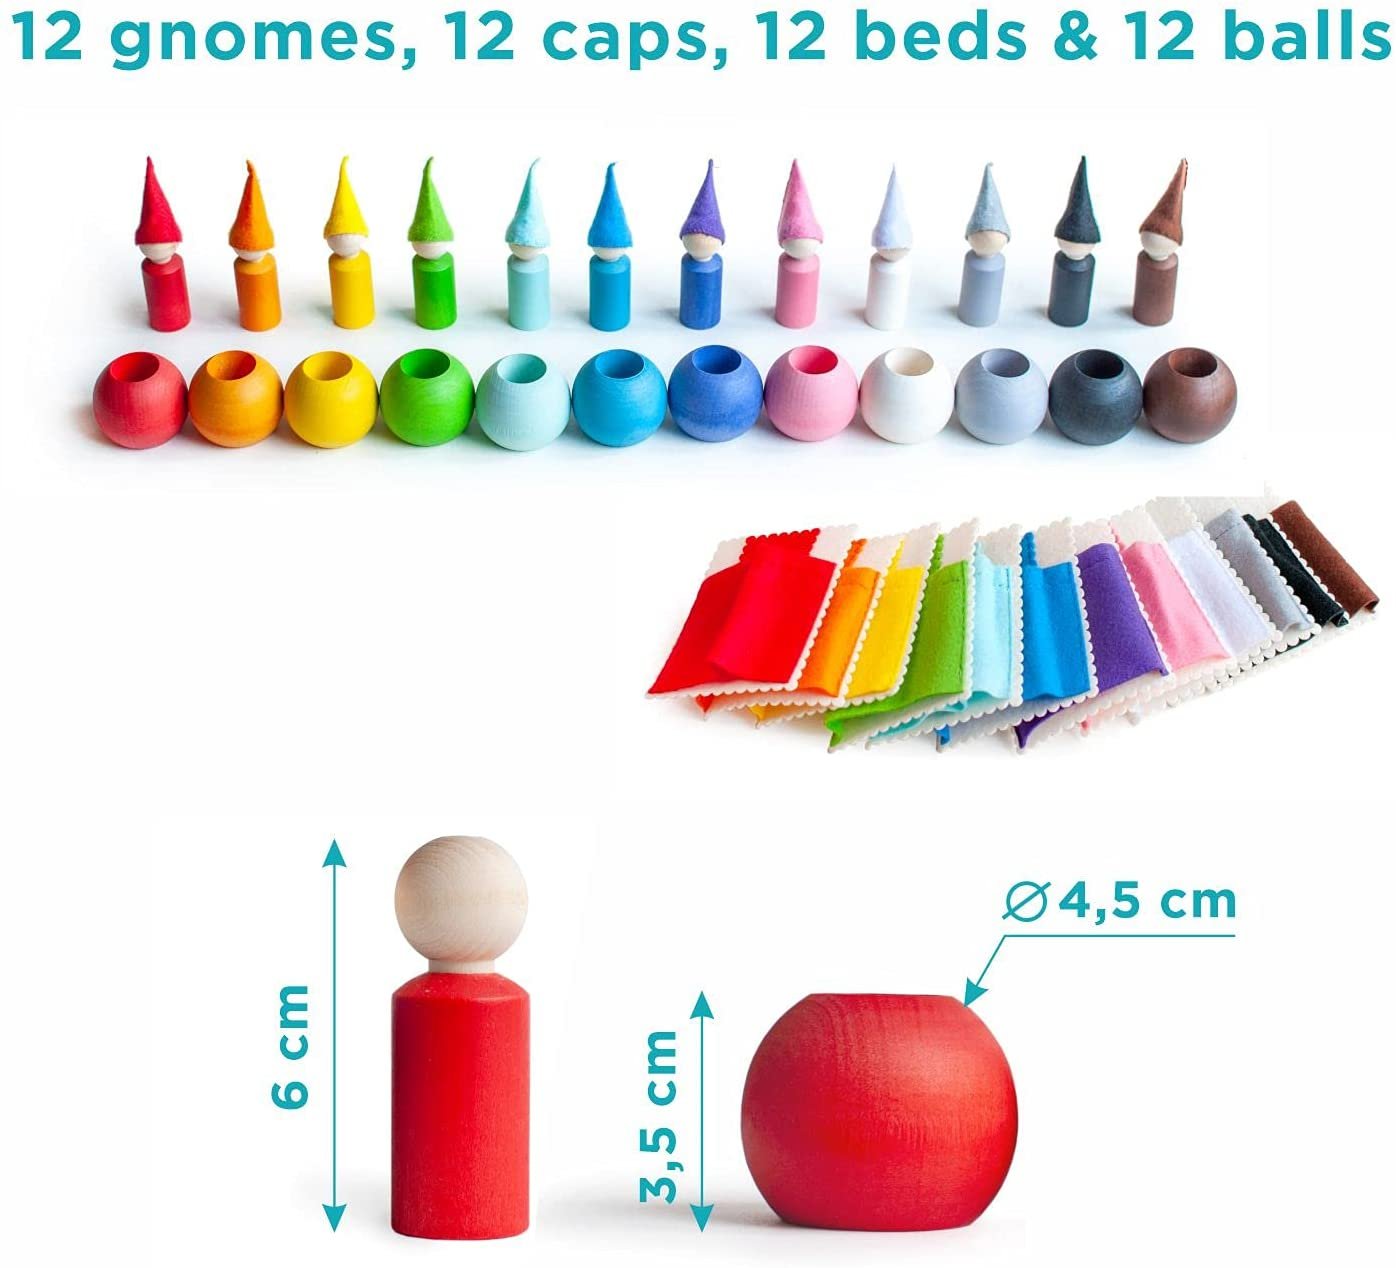 Peg Dolls with Hats and Beds in Balls 12 Gnomes 60 mm